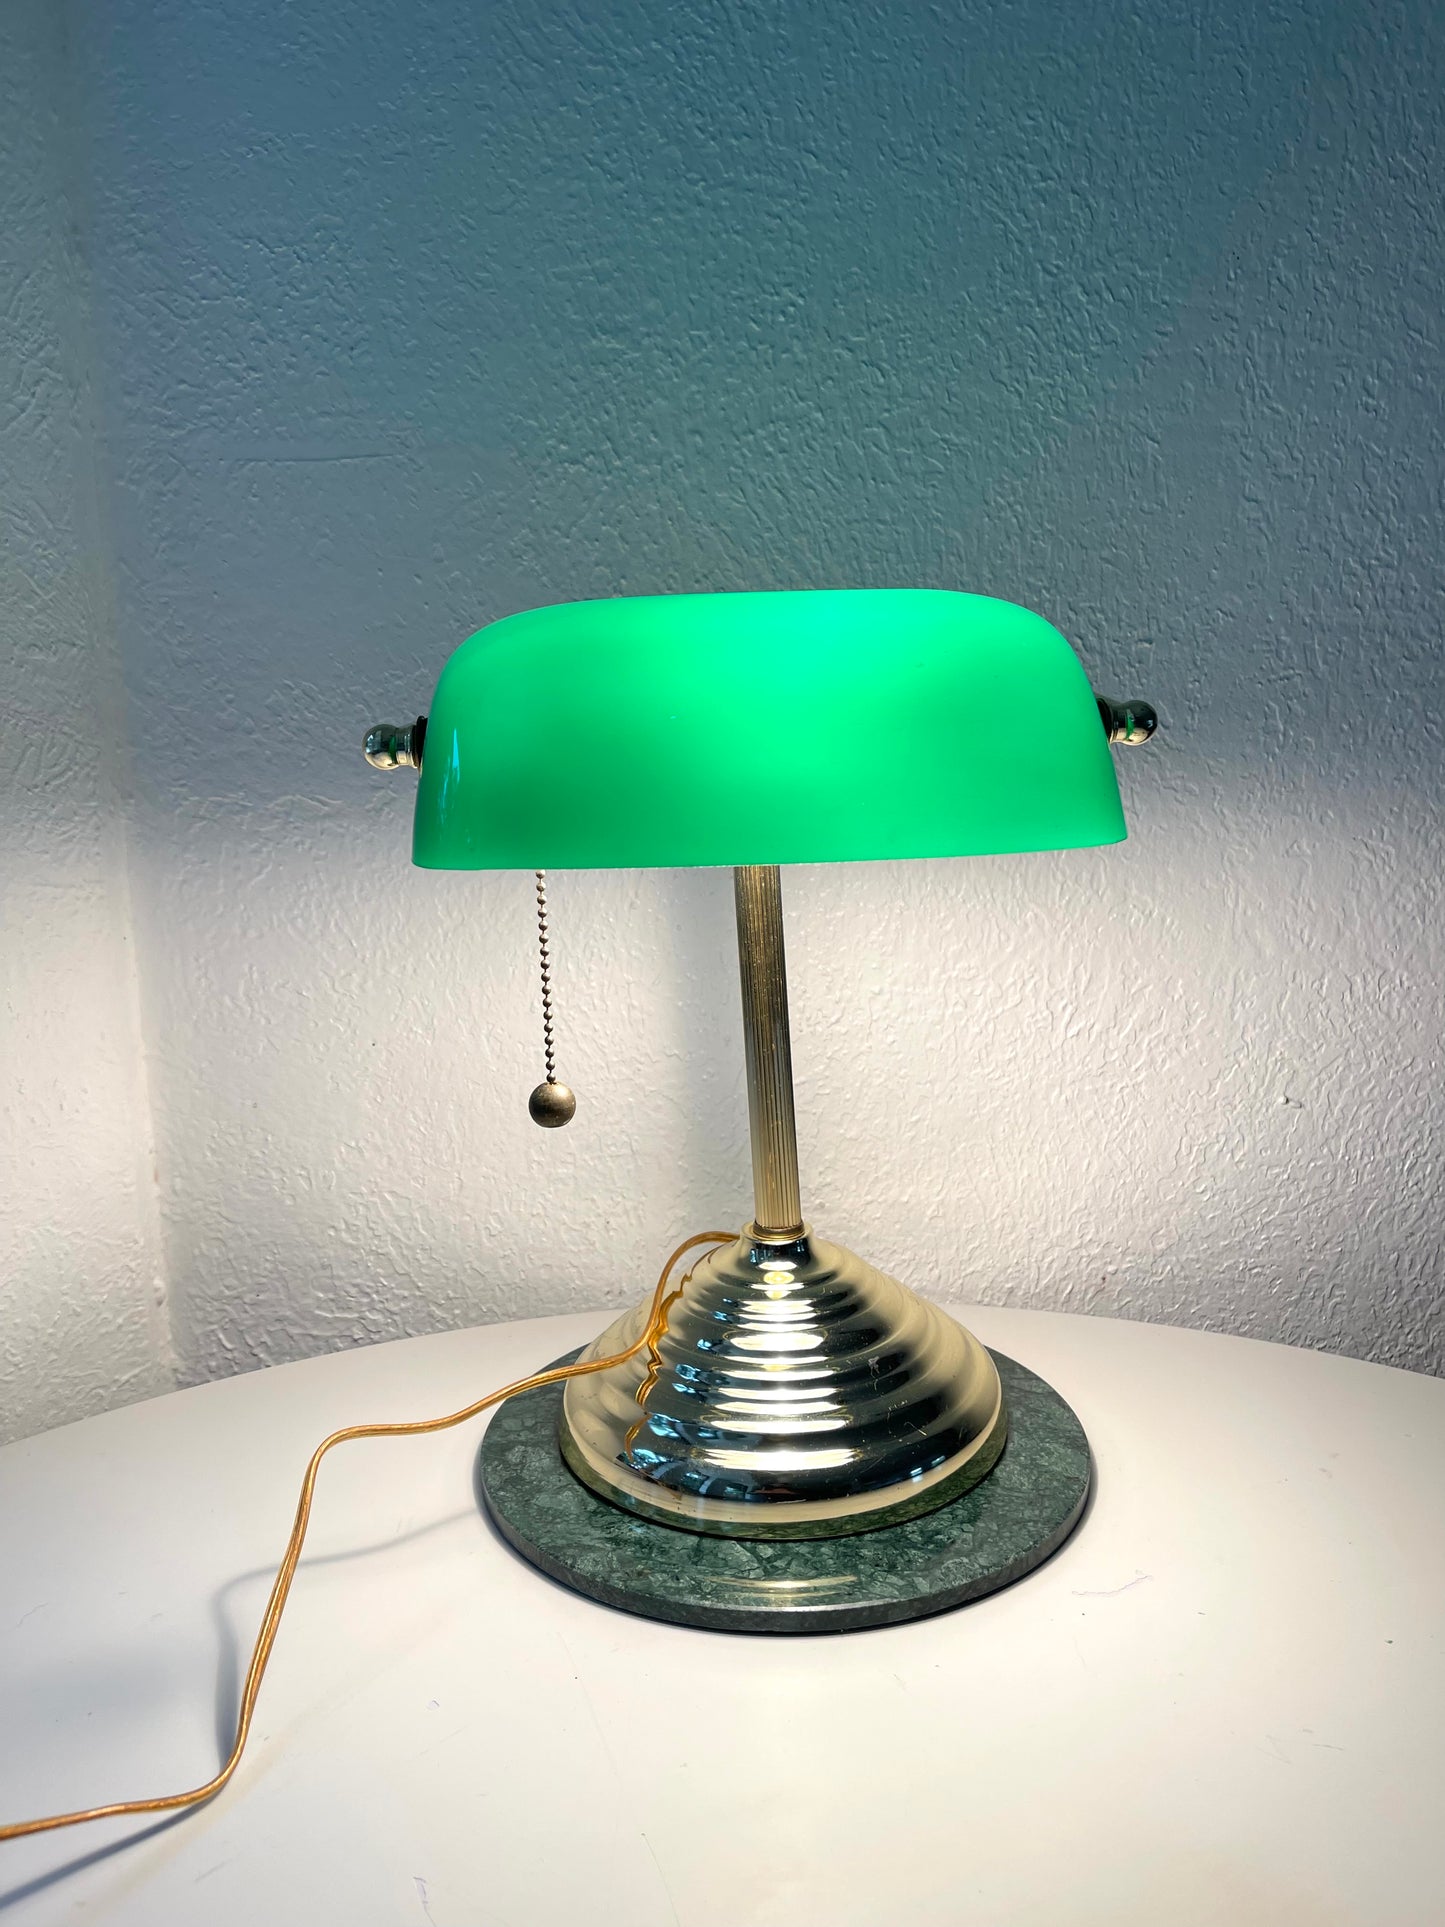 Vintage brass bankers lamp w/ green glass shade